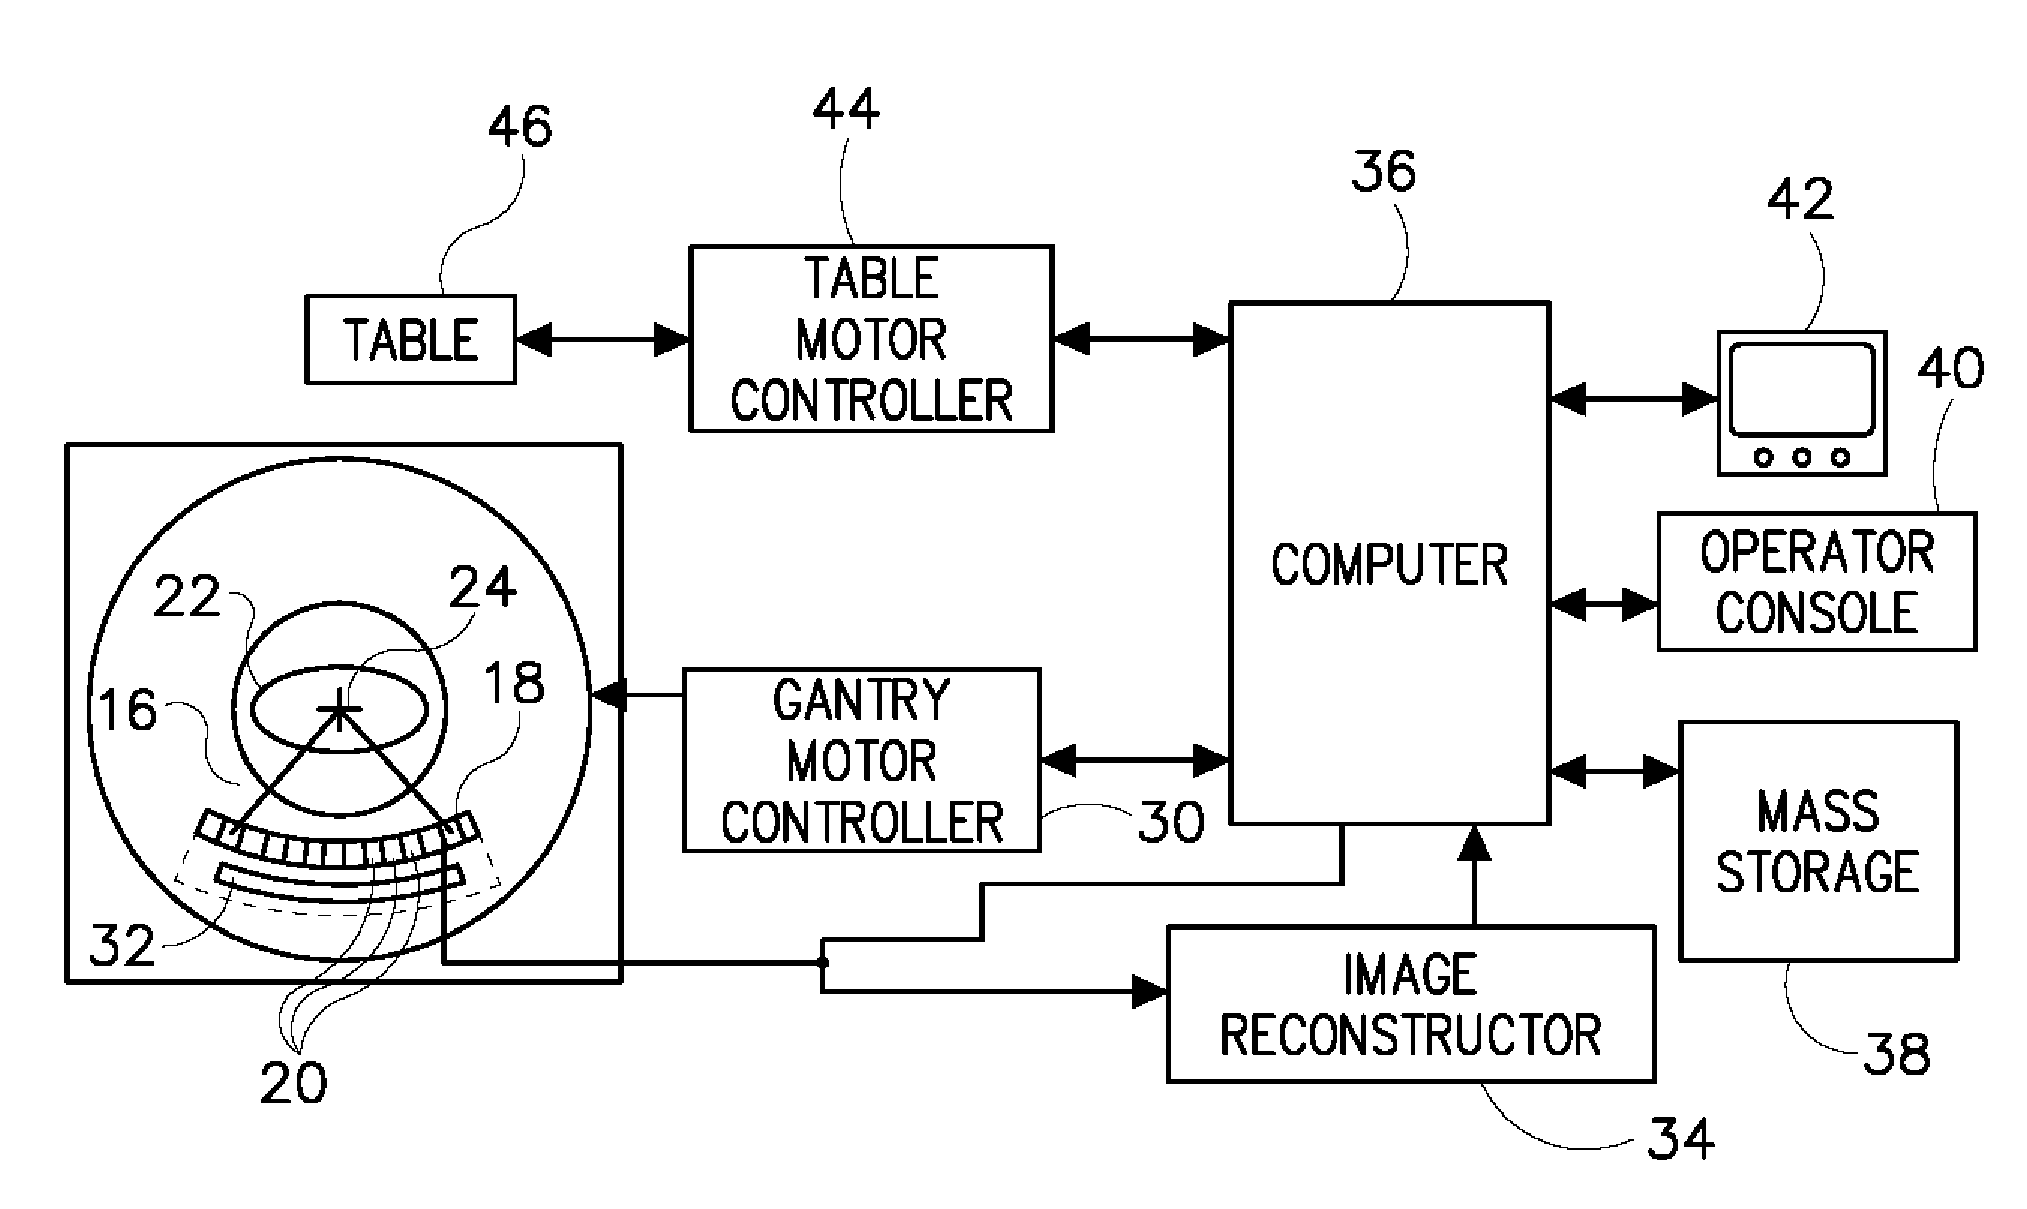 Data acquisition system for photon counting and energy discriminating detectors